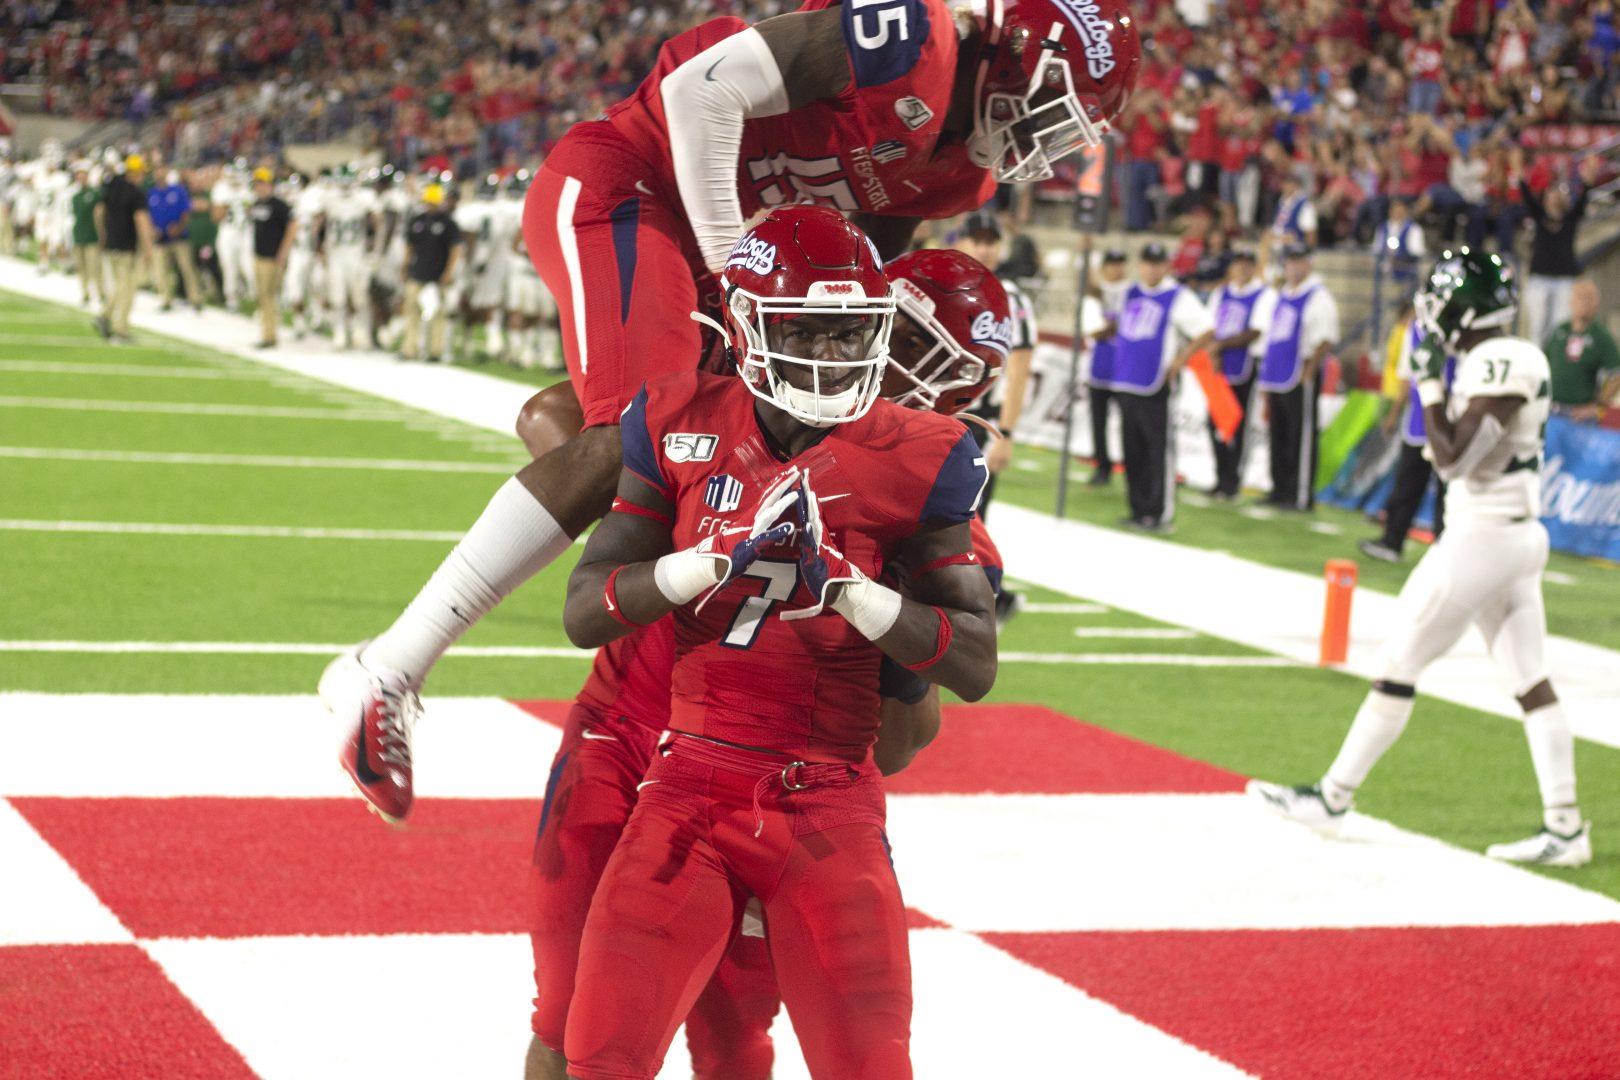 Fresno+State+wide+receiver+Derrion+Grimm+%28center%29+celebrates+with+teammates+after+scoring+a+touchdown+during+a+home+game+at+the+Bulldog+Stadium+on+Saturday%2C+Sept.+21%2C+2019.+%28Jorge+Rodriguez%2F+The+Collegian%29